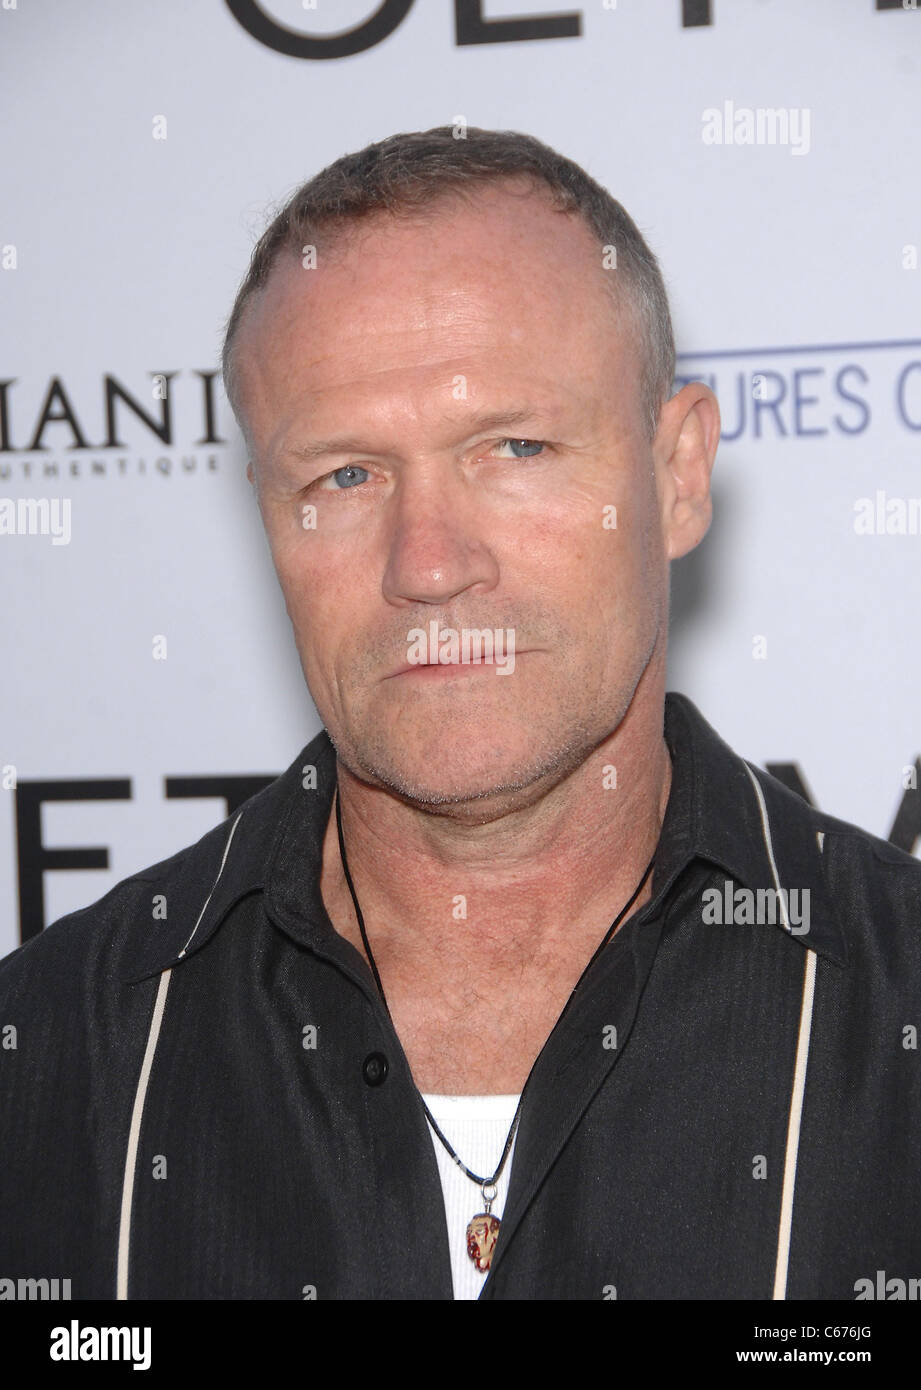 Michael Rooker at arrivals for GET LOW Premiere, Samuel Goldwyn Theater at AMPAS, Los Angeles, CA July 27, 2010. Photo By: Michael Germana/Everett Collection Stock Photo